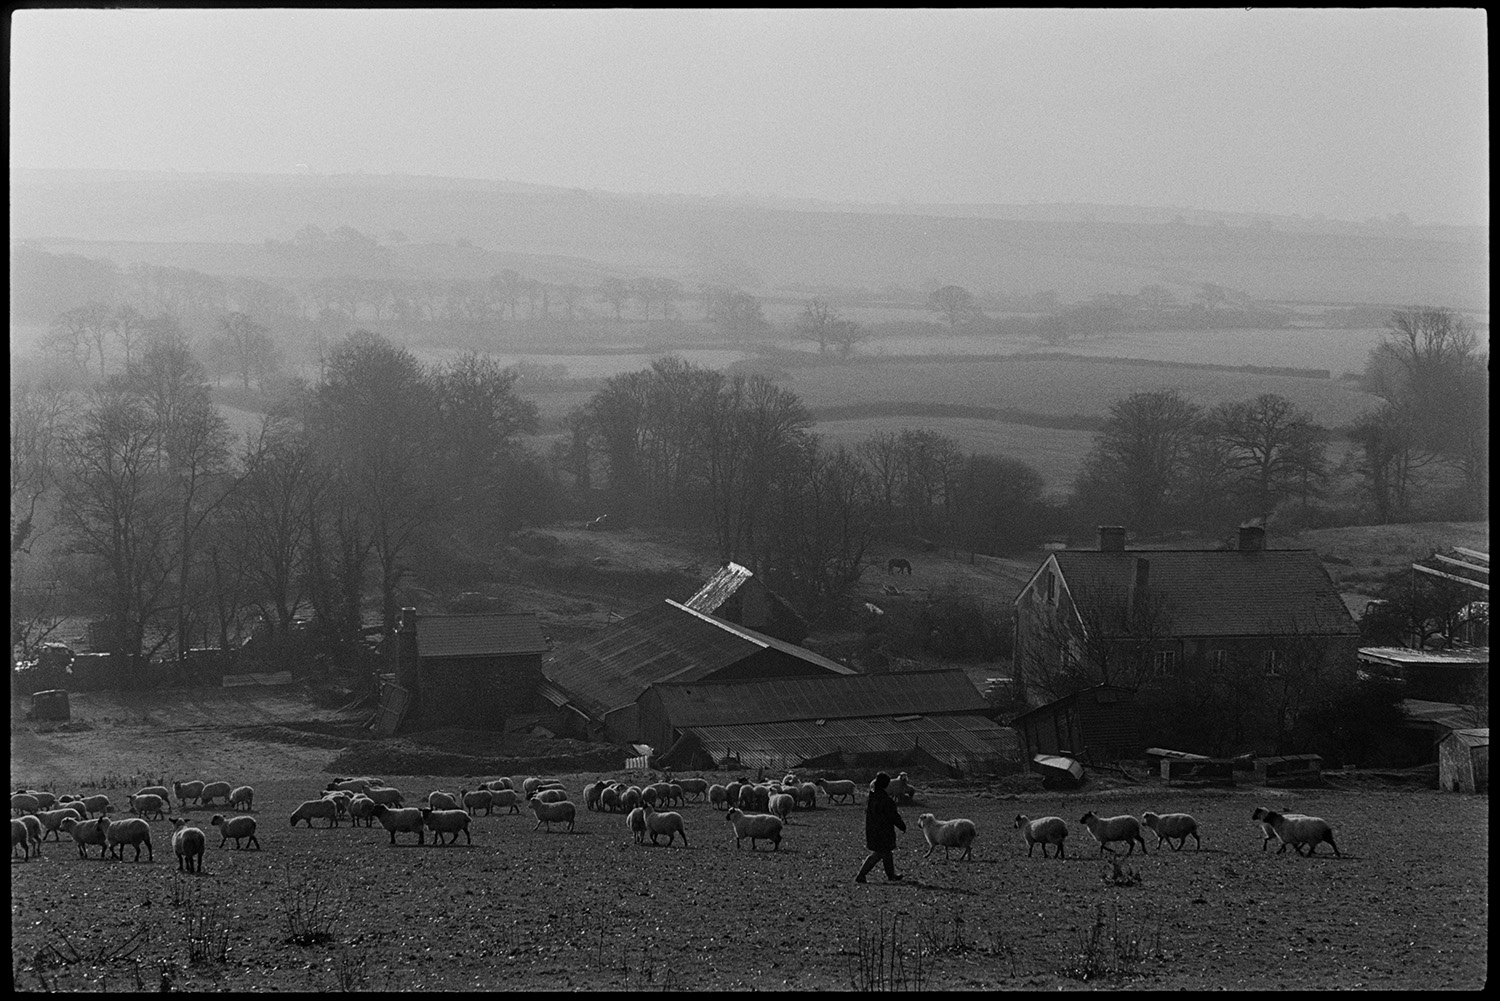 Large old oak in field with sheep, farmer feeding cattle, distant view with shepherd.
[A person with a flock of sheep in a field at Brushford Barton. A number of farm buildings are shown with a misty landscape of field and trees in the background.]